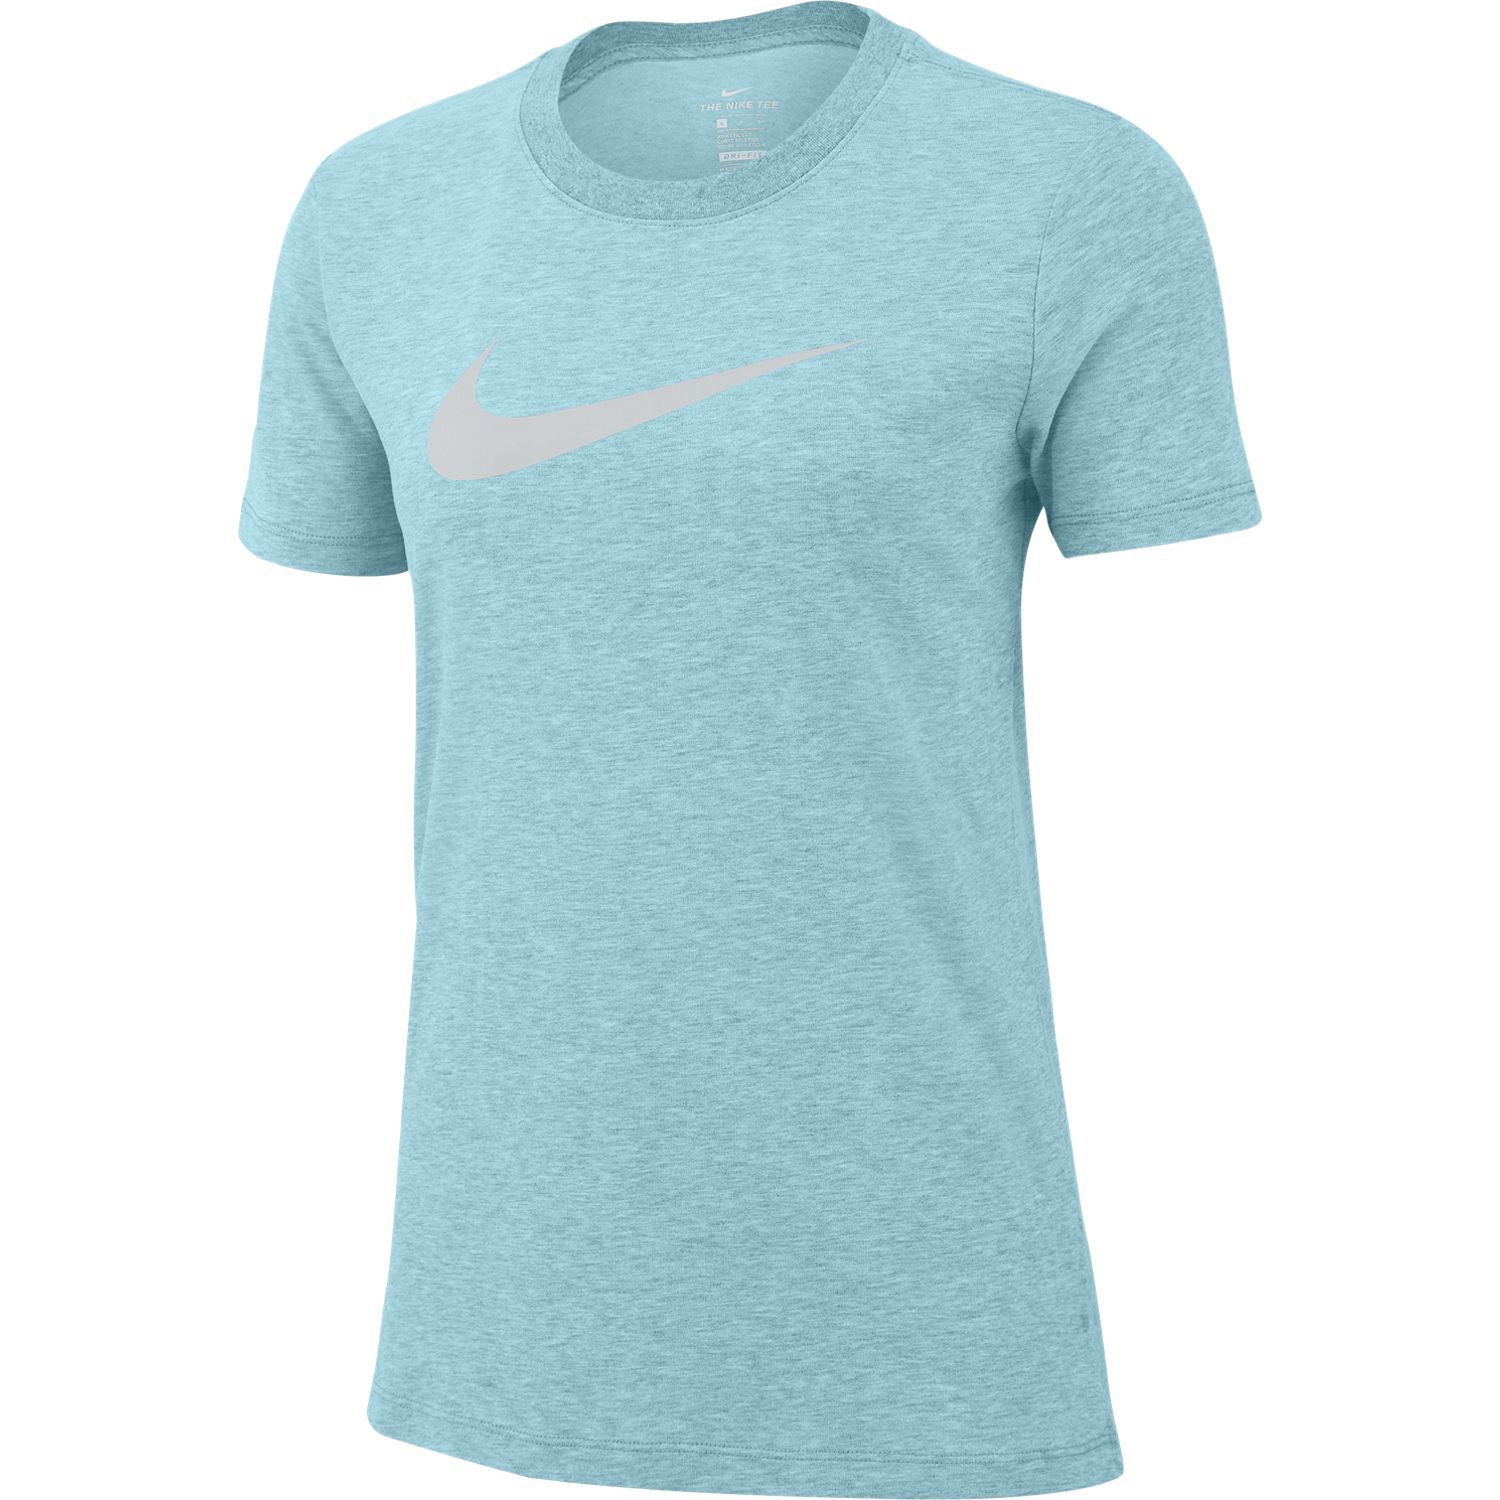 teal and grey nike outfit